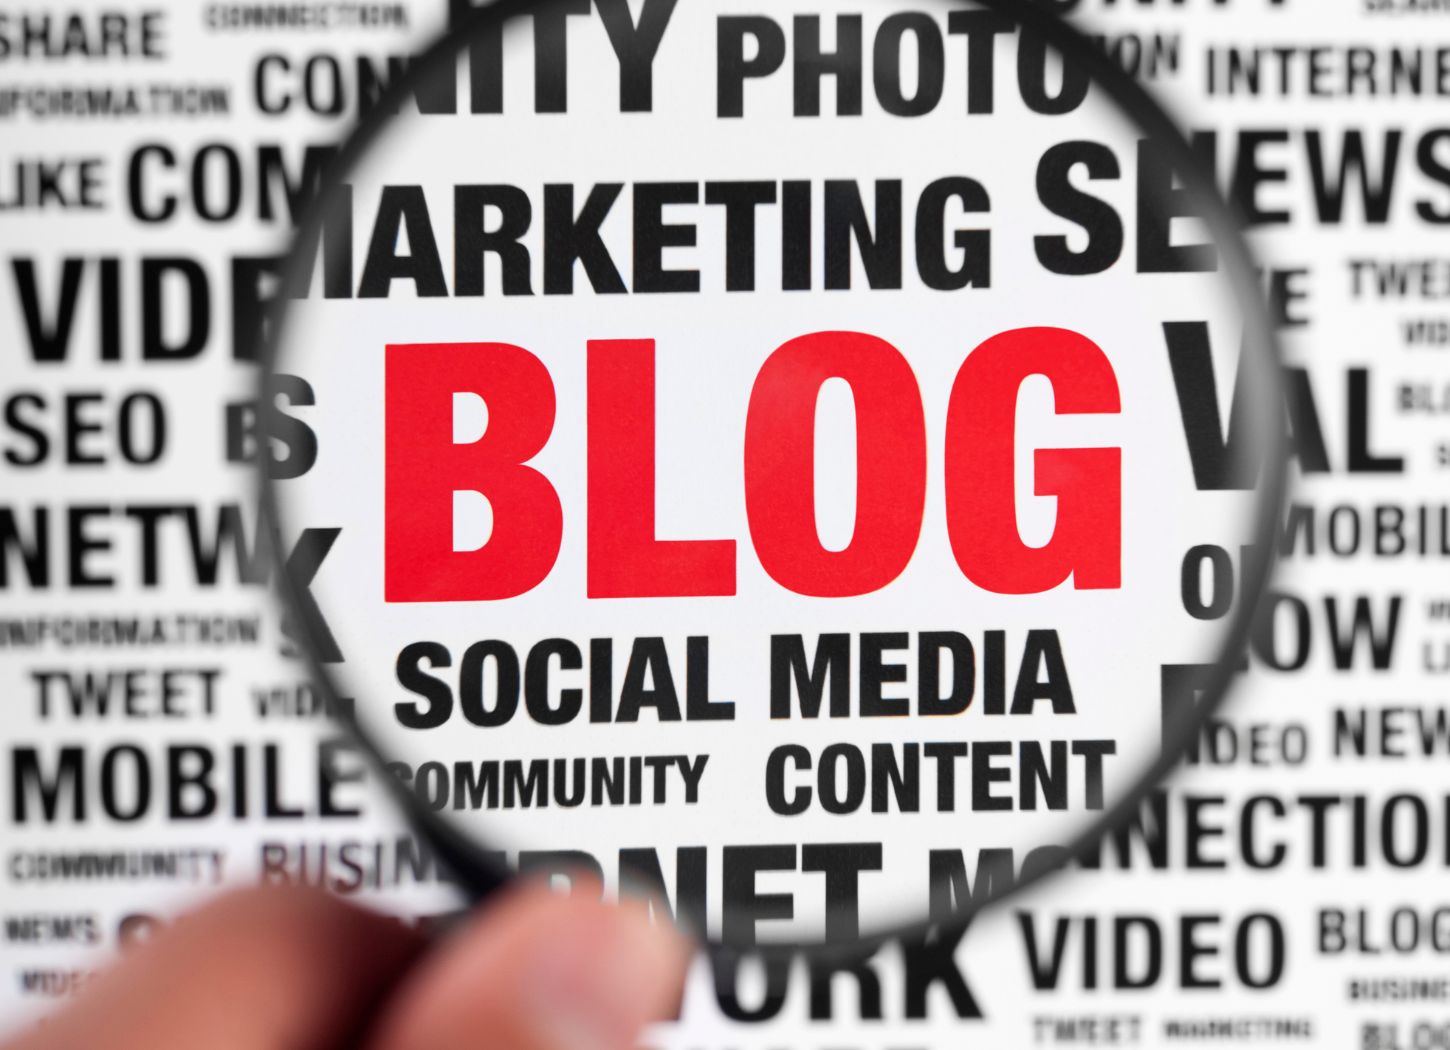 Business Blog - Content Marketing tips, content marketing ideas, content marketing blogs, business blogs, business blogging